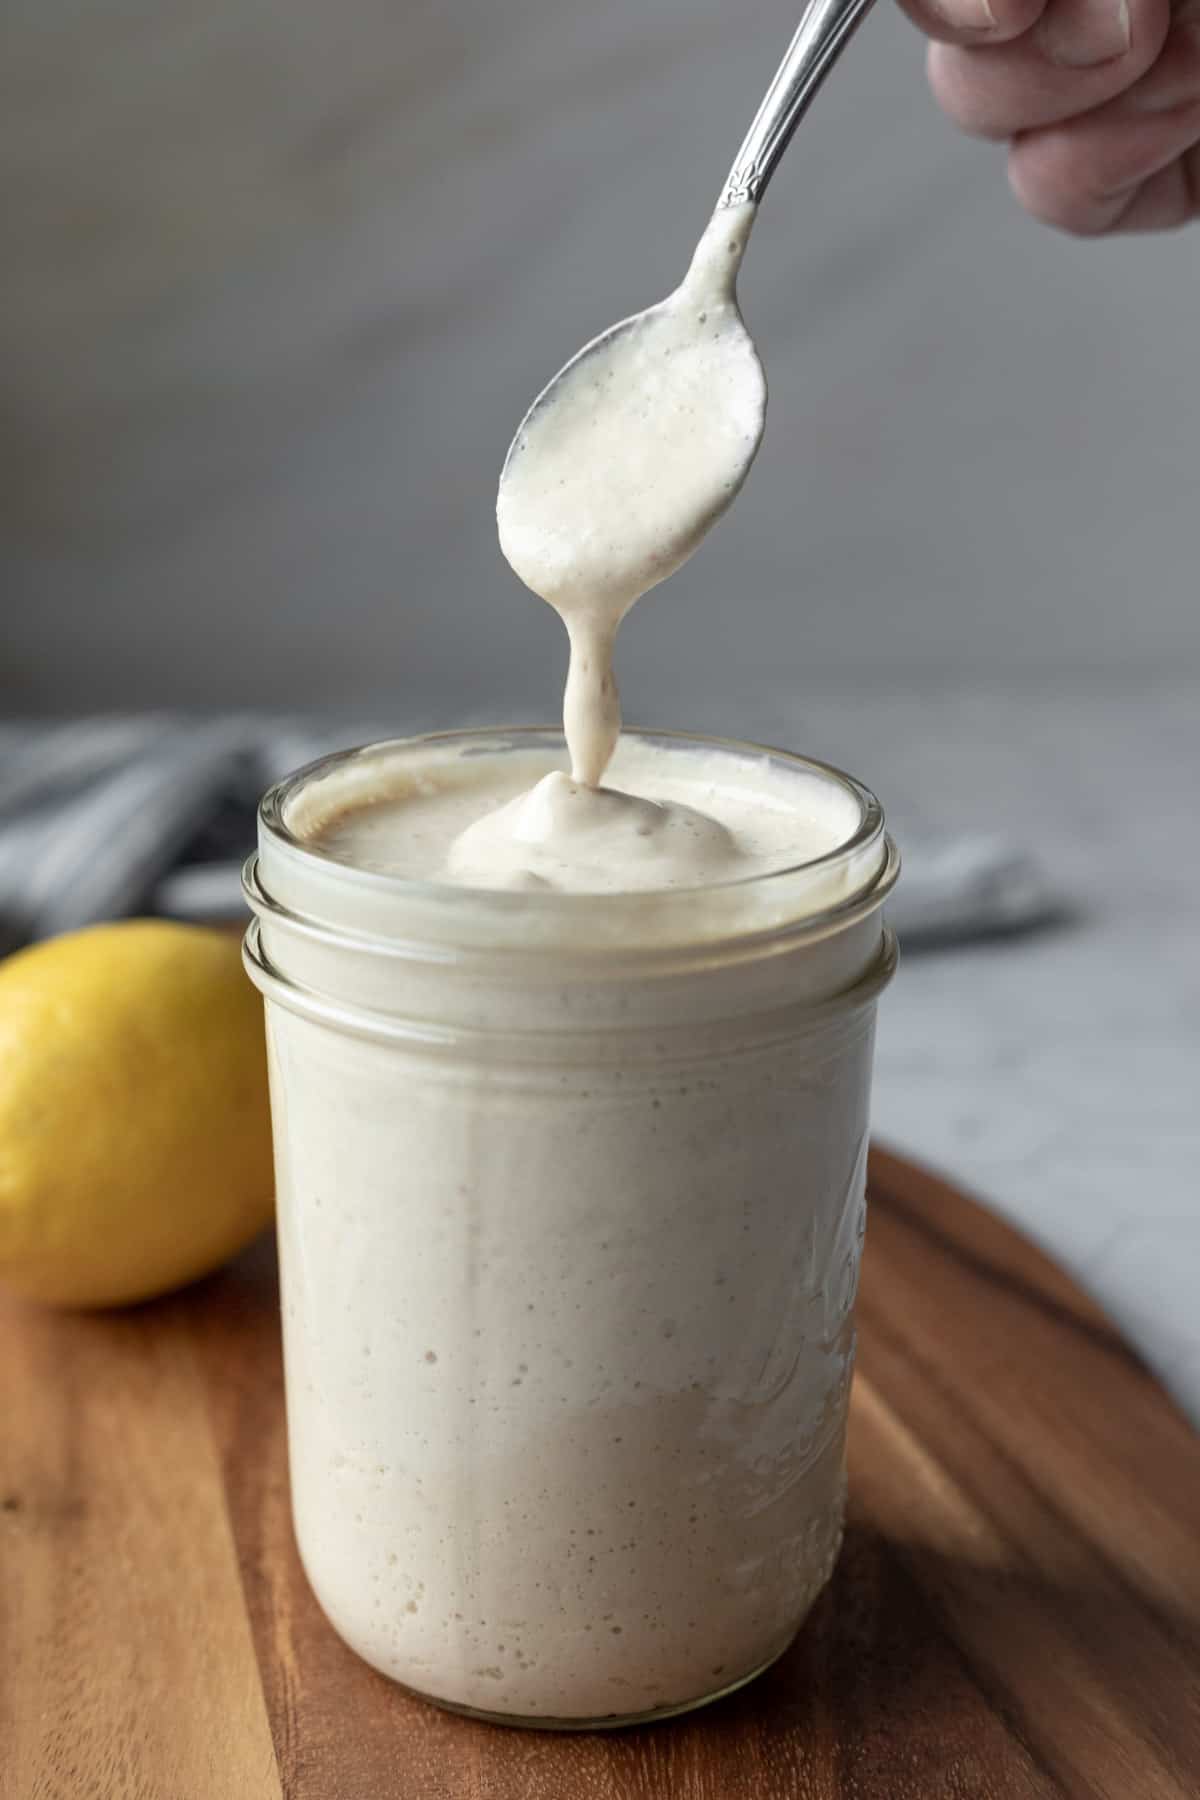 creamy sunflower seed dressing dripping from a spoon into a glass jar.